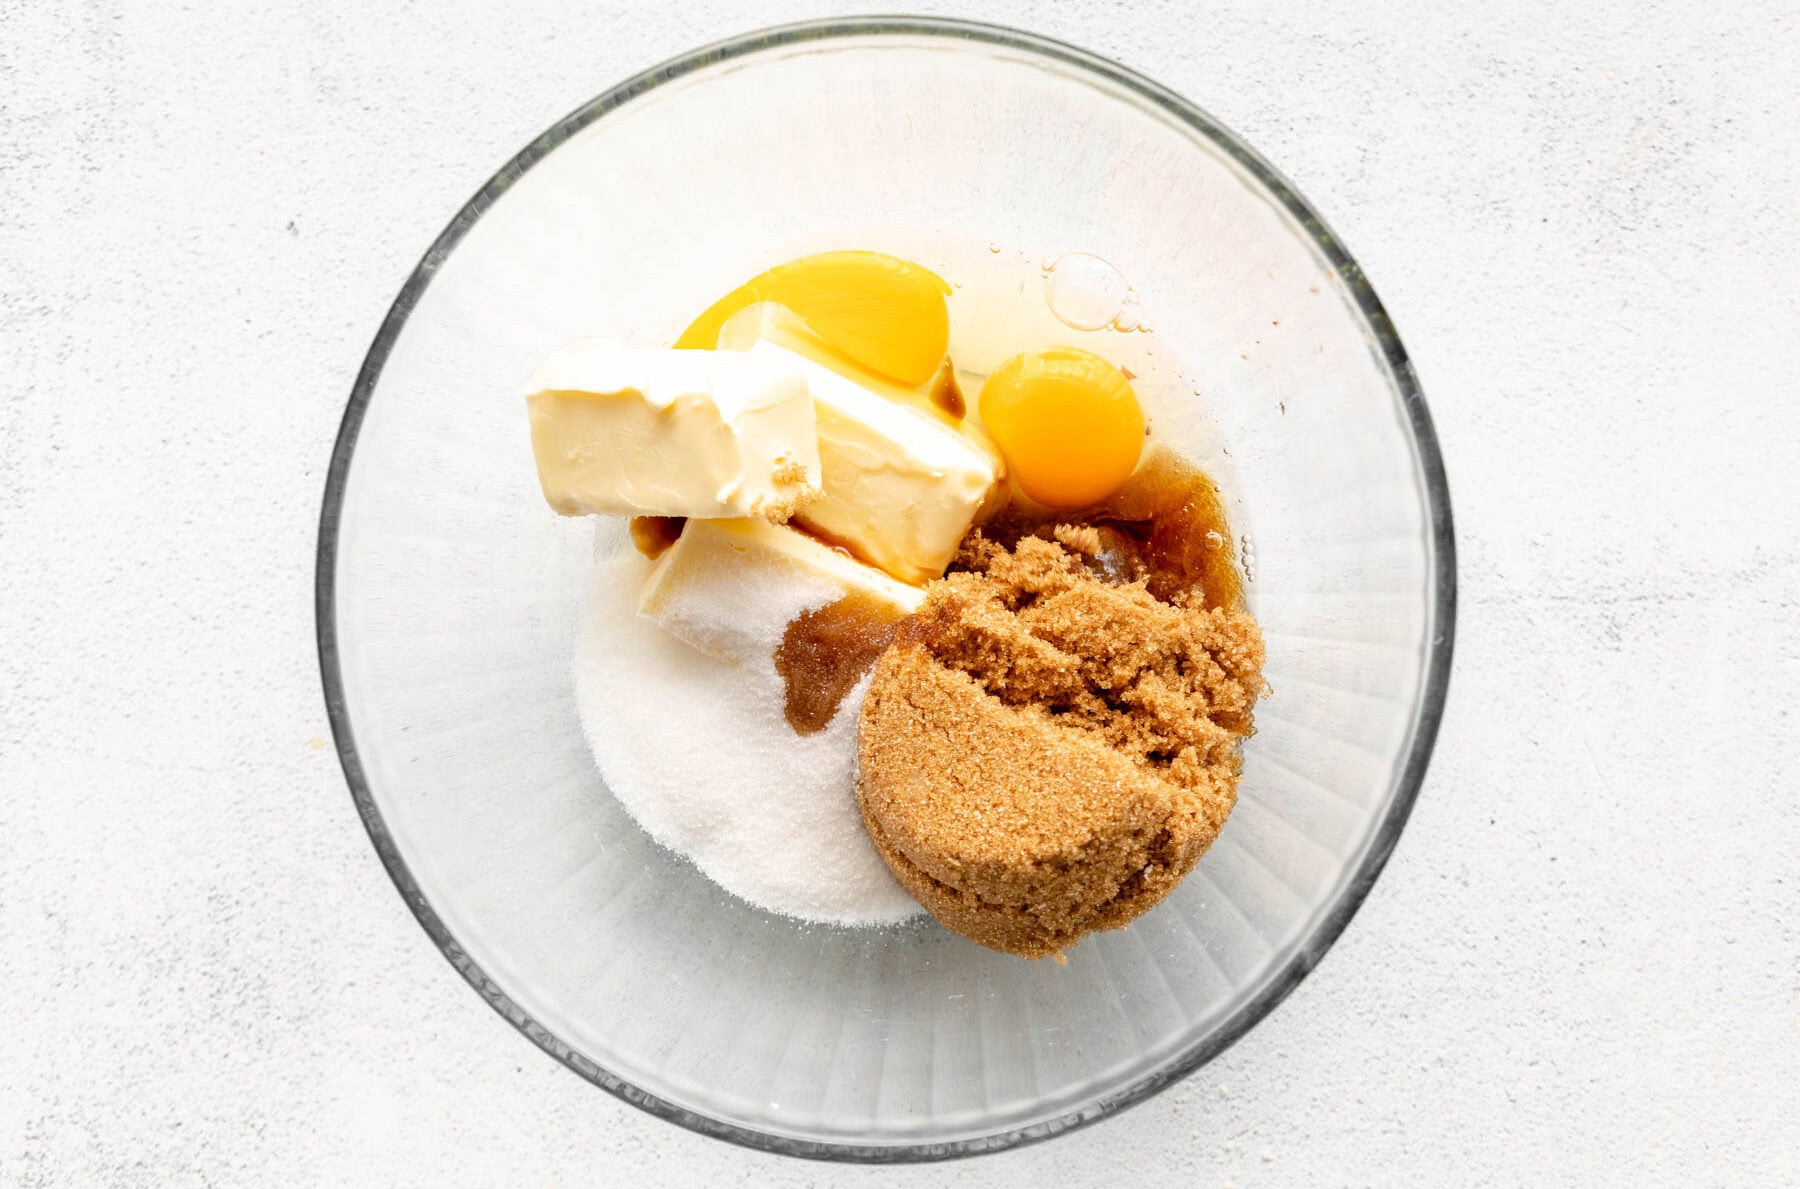 butter, white sugar, brown sugar, and egg in a glass bowl.